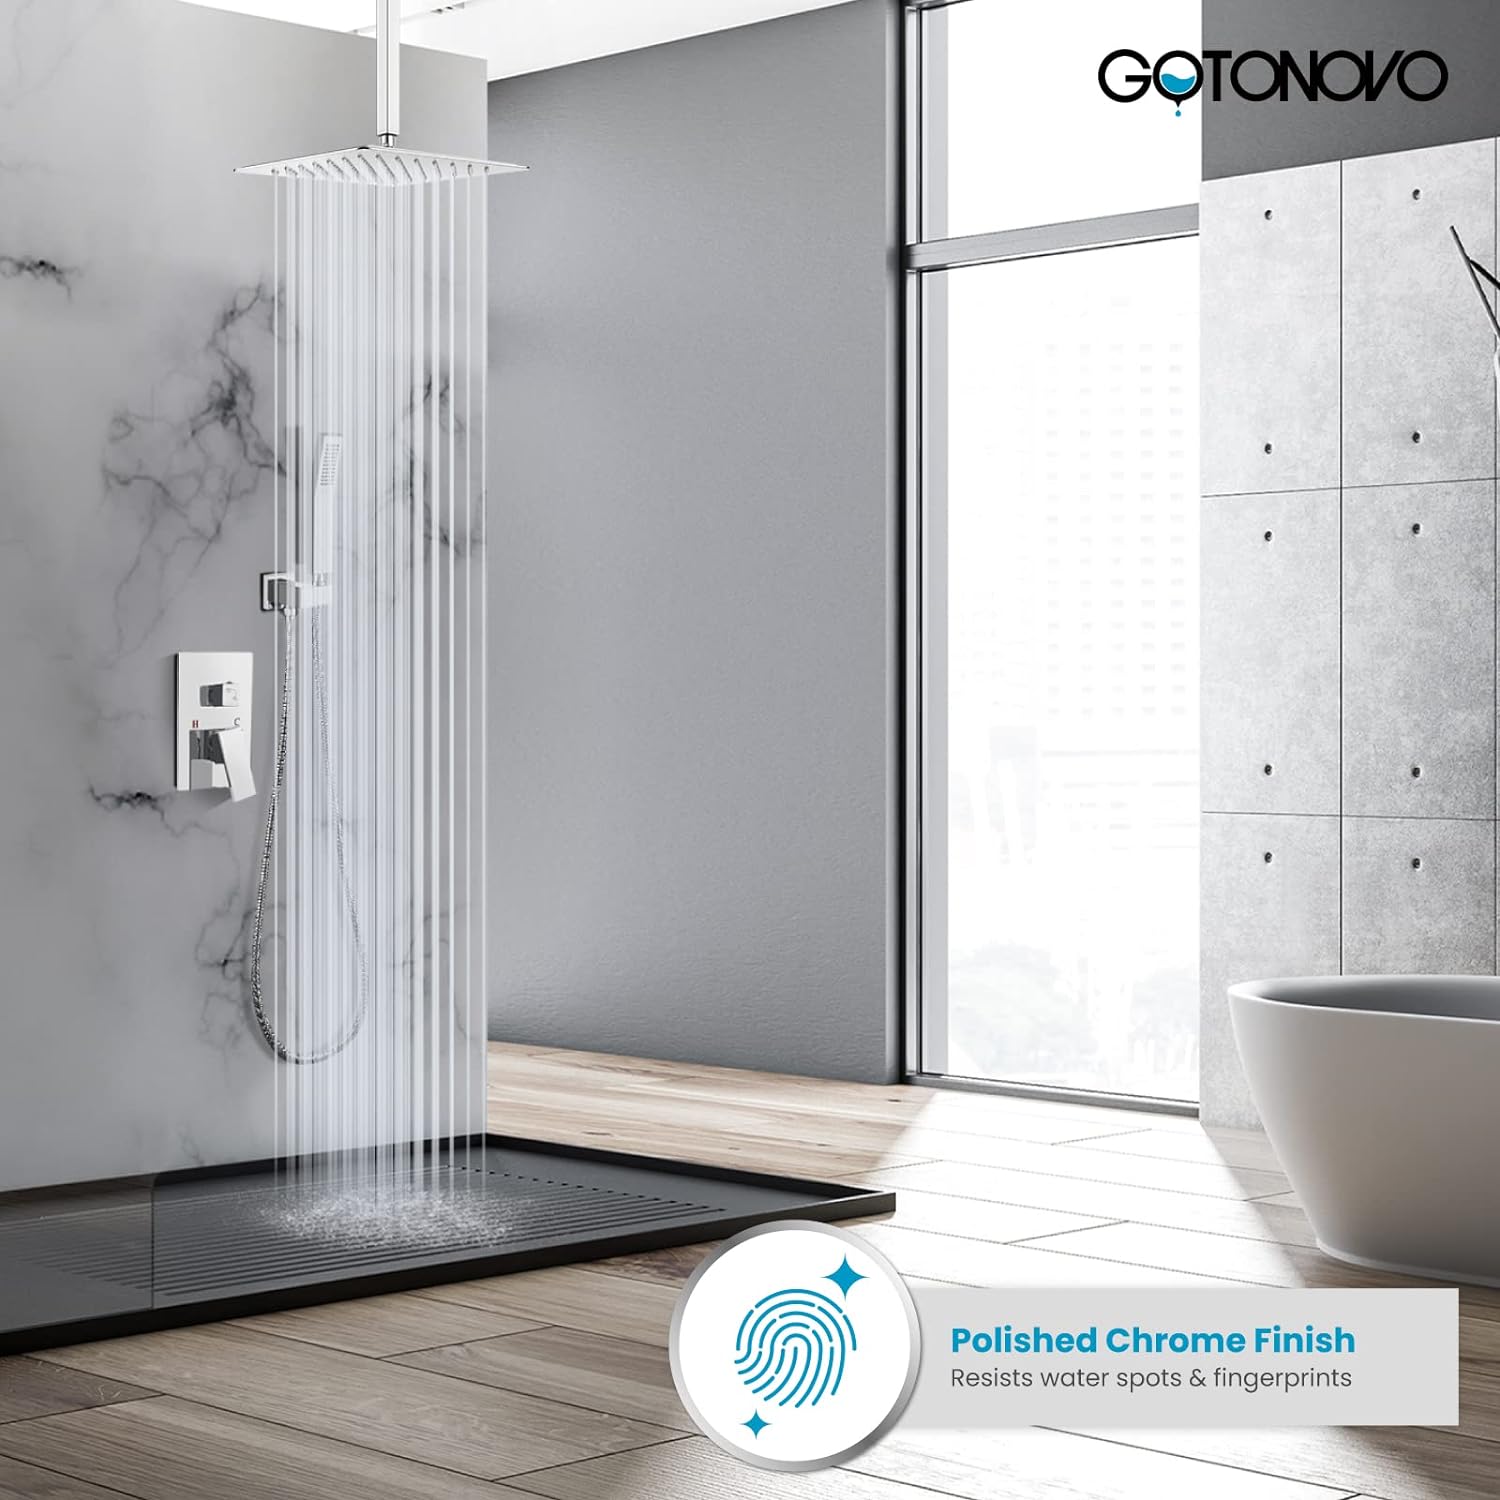 gotonovo Polished Chrome Bathroom 10 Inch Rainfall Shower Head Ceiling Mount with Handheld Spray Shower Mixer Faucet Luxury High Pressure Shower Combo Set Rough-in Valve and Shower Trim Included